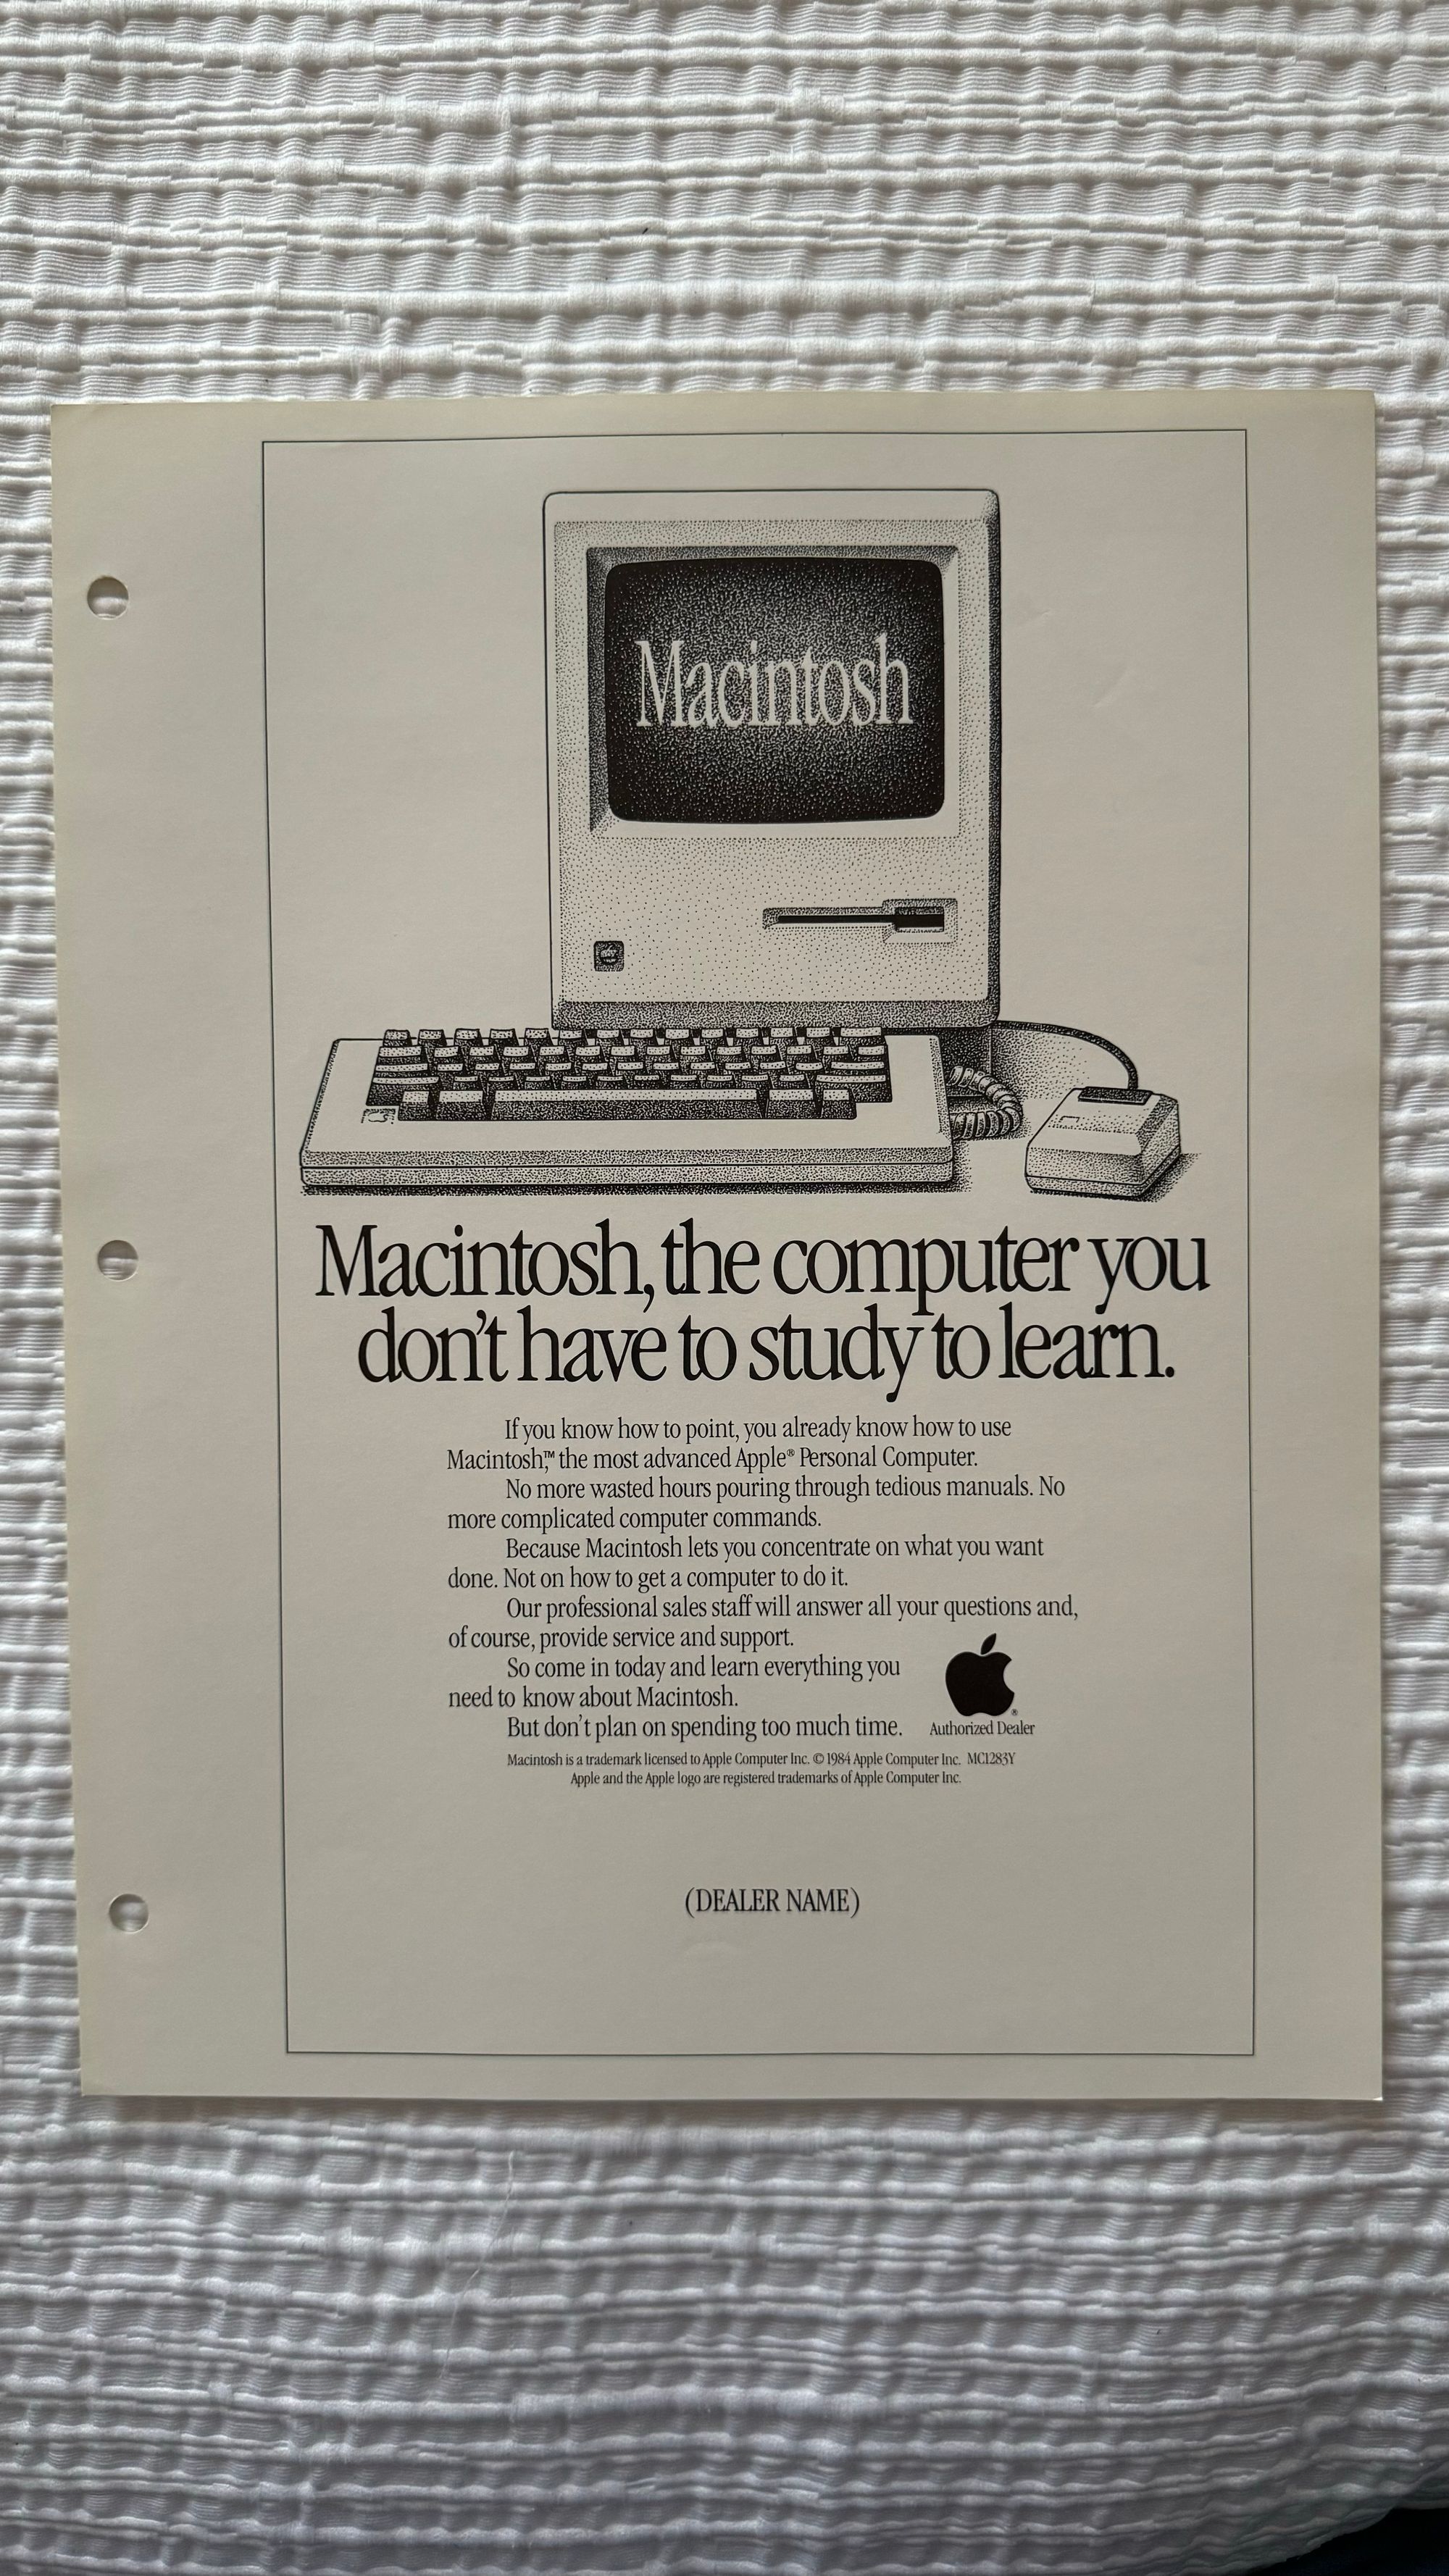 This page was part of some Apple dealer marketing material found in one of my old souvenir boxes. The Mac was such a unique design. The full set of images is published in “Remembering Apple in 1985 — Apple Dealer Promotional Material”